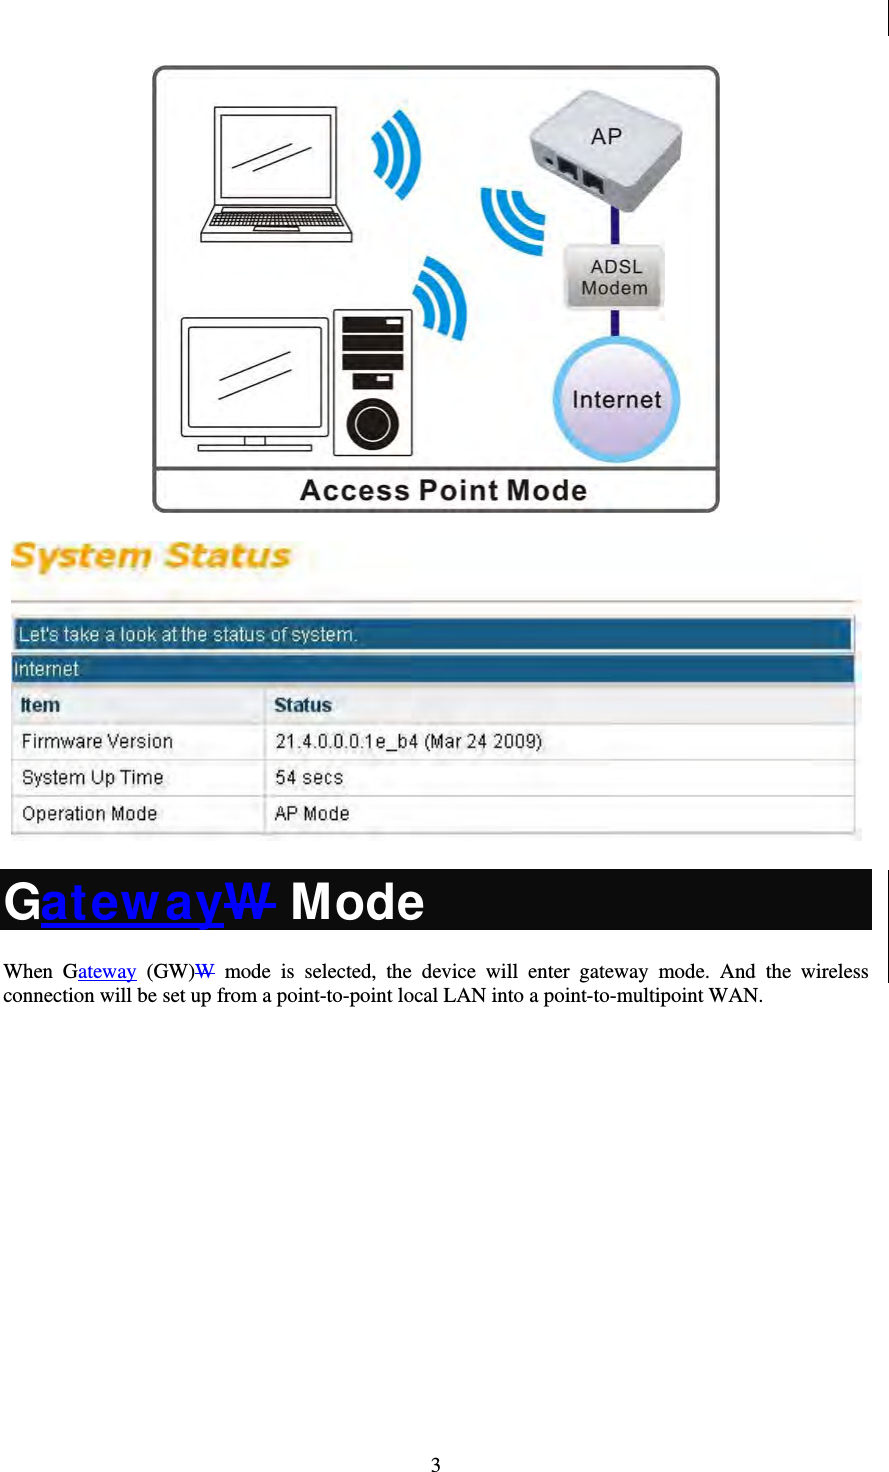   3    GatewayW Mode When Gateway (GW)W mode is selected, the device will enter gateway mode. And the wireless connection will be set up from a point-to-point local LAN into a point-to-multipoint WAN. 